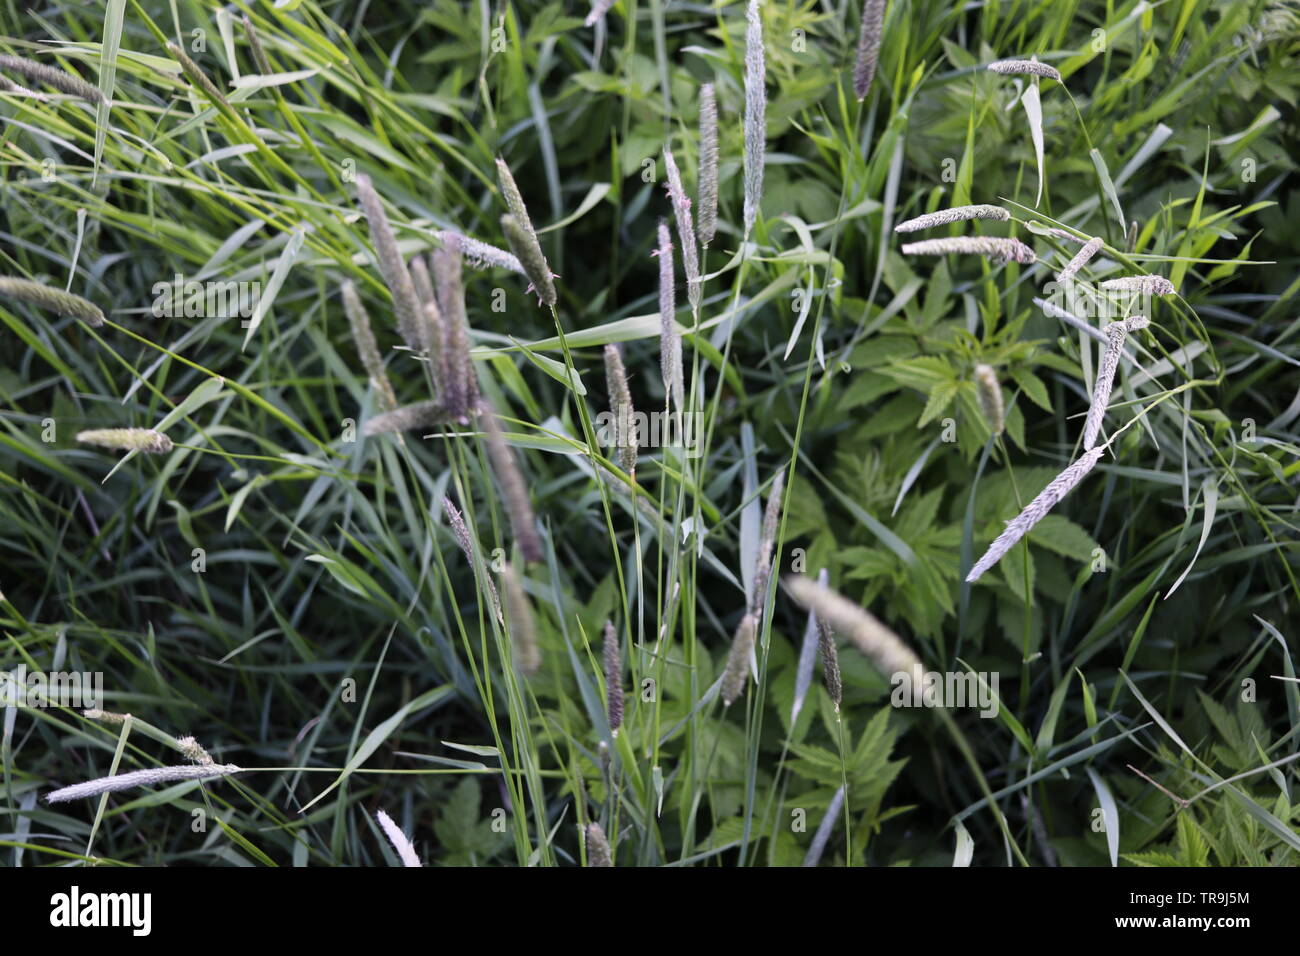 A close-up of reeds growing on green ground. Stock Photo